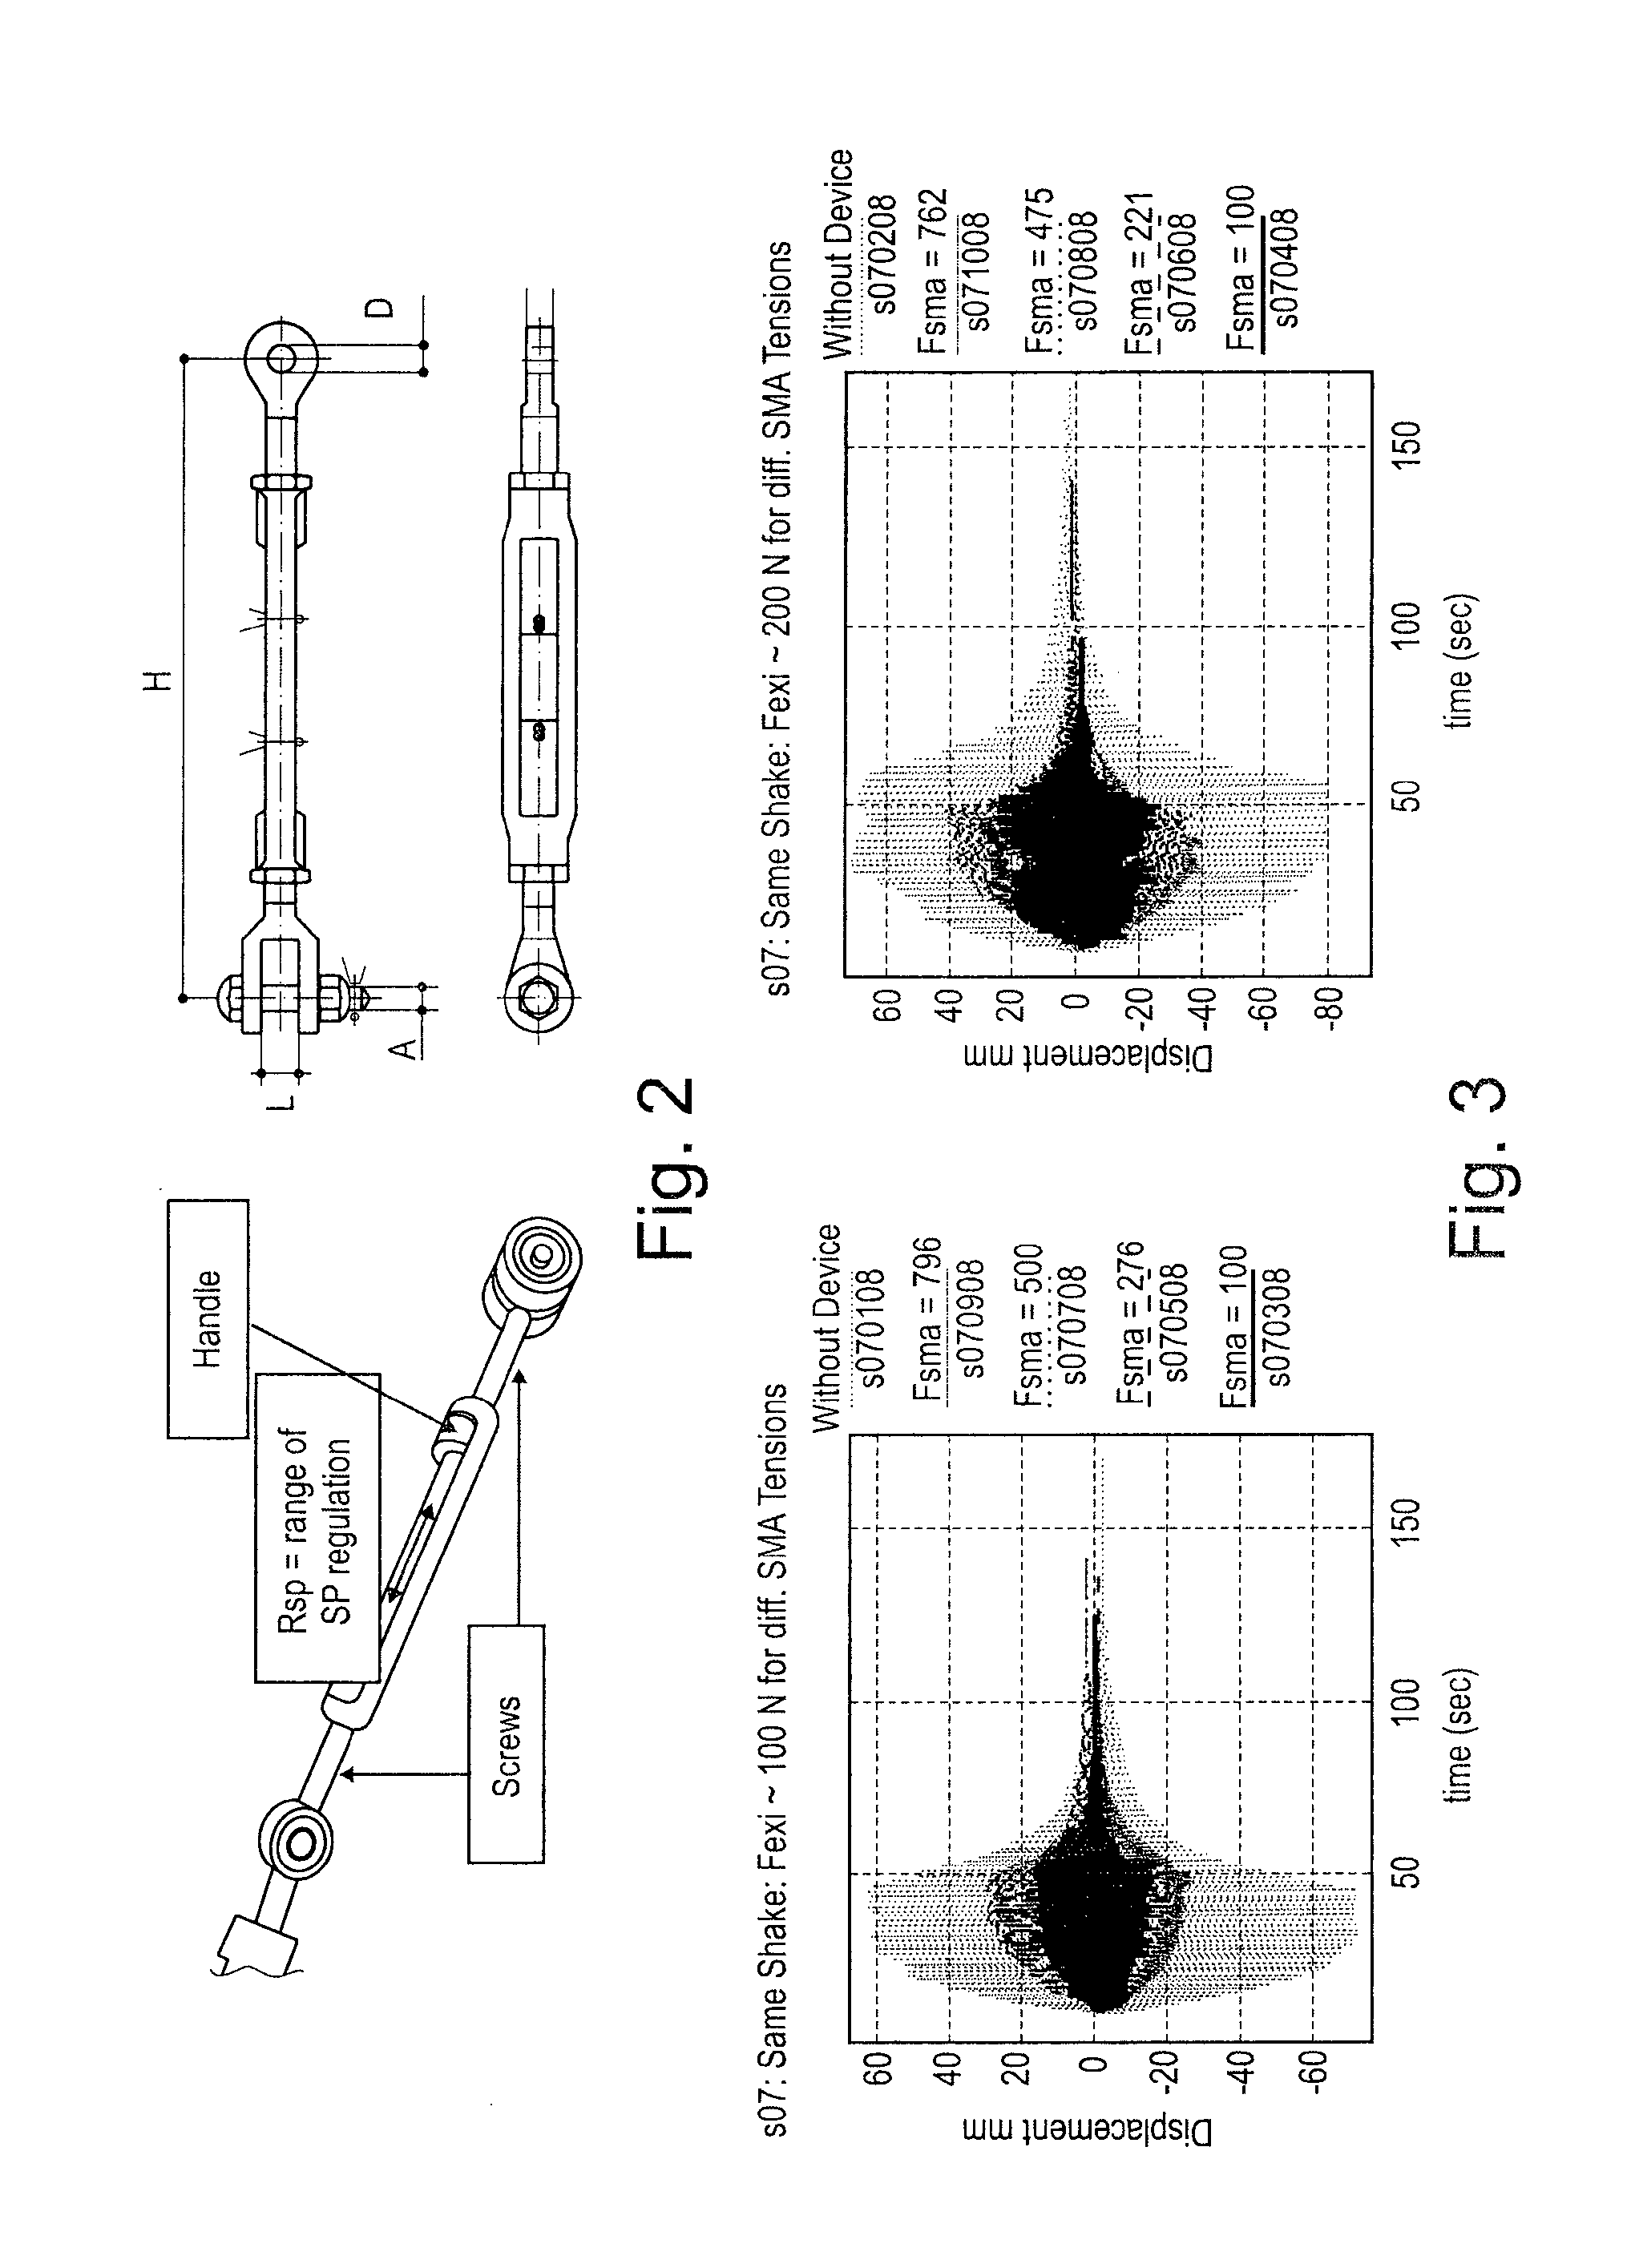 Method for protecting taut cables from vibrations